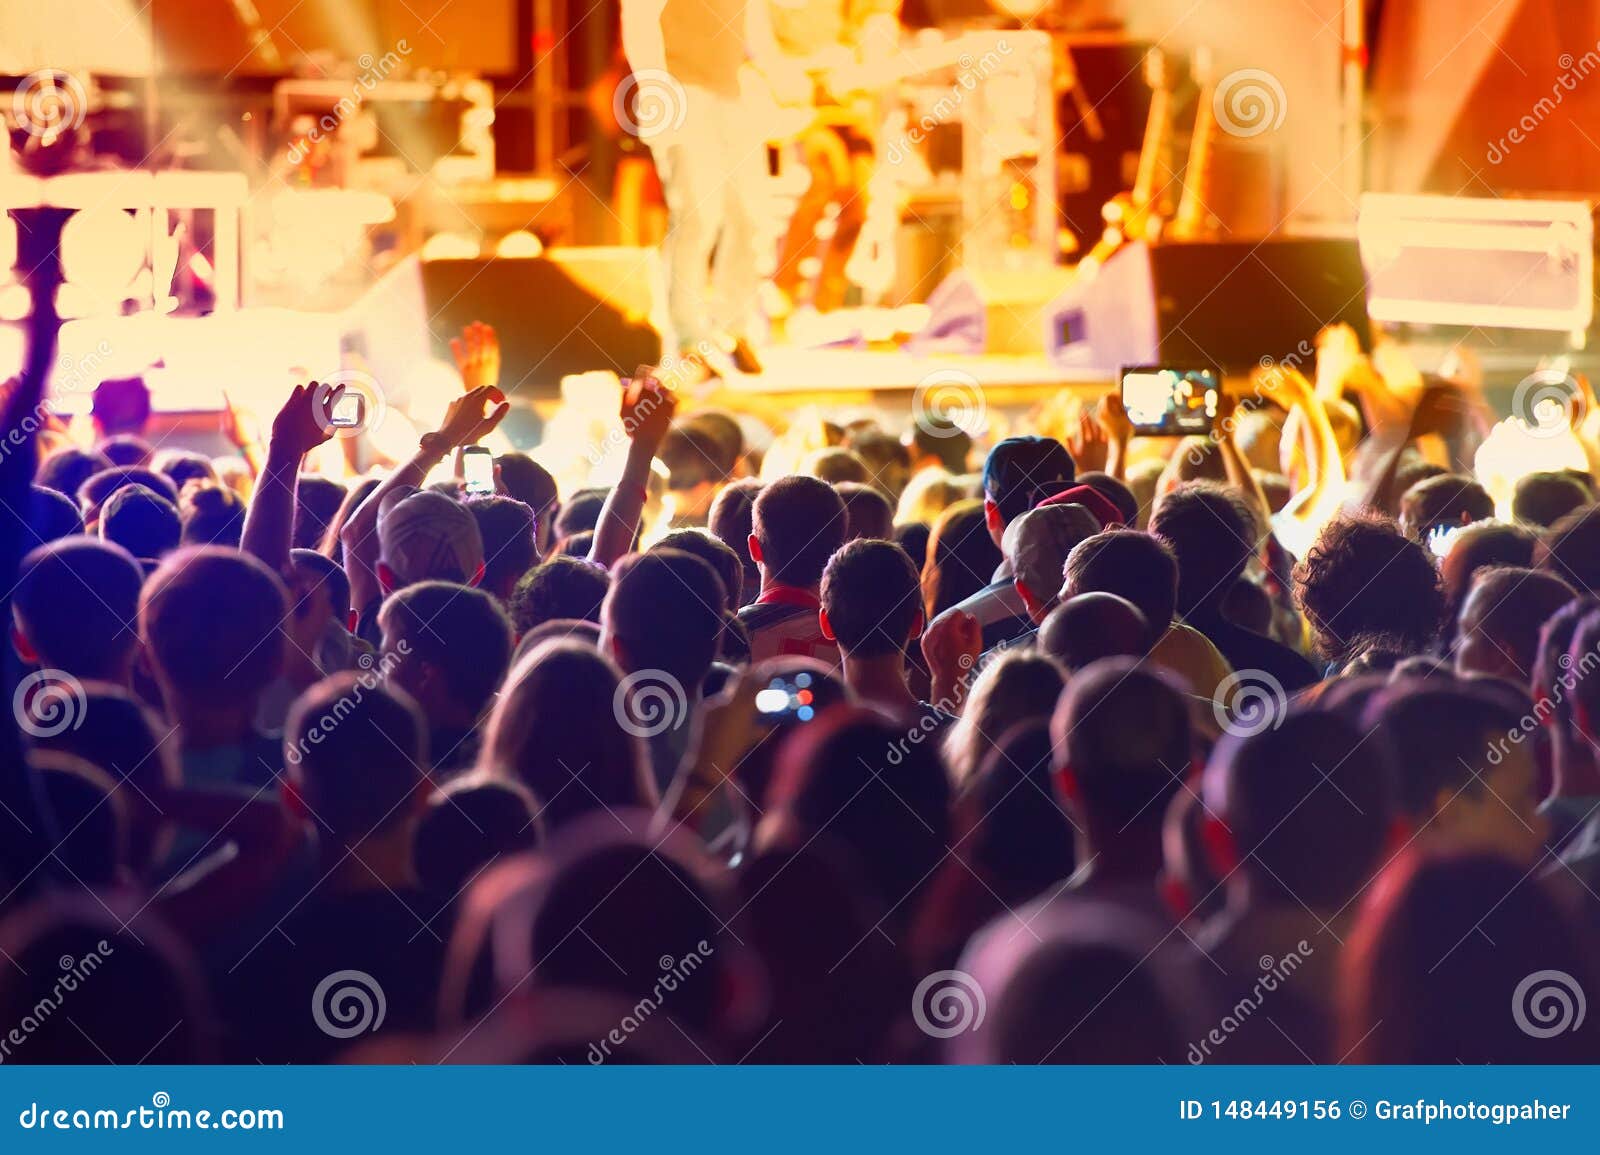 Fans and Rock Musicians during the Performance Editorial Photo - Image ...